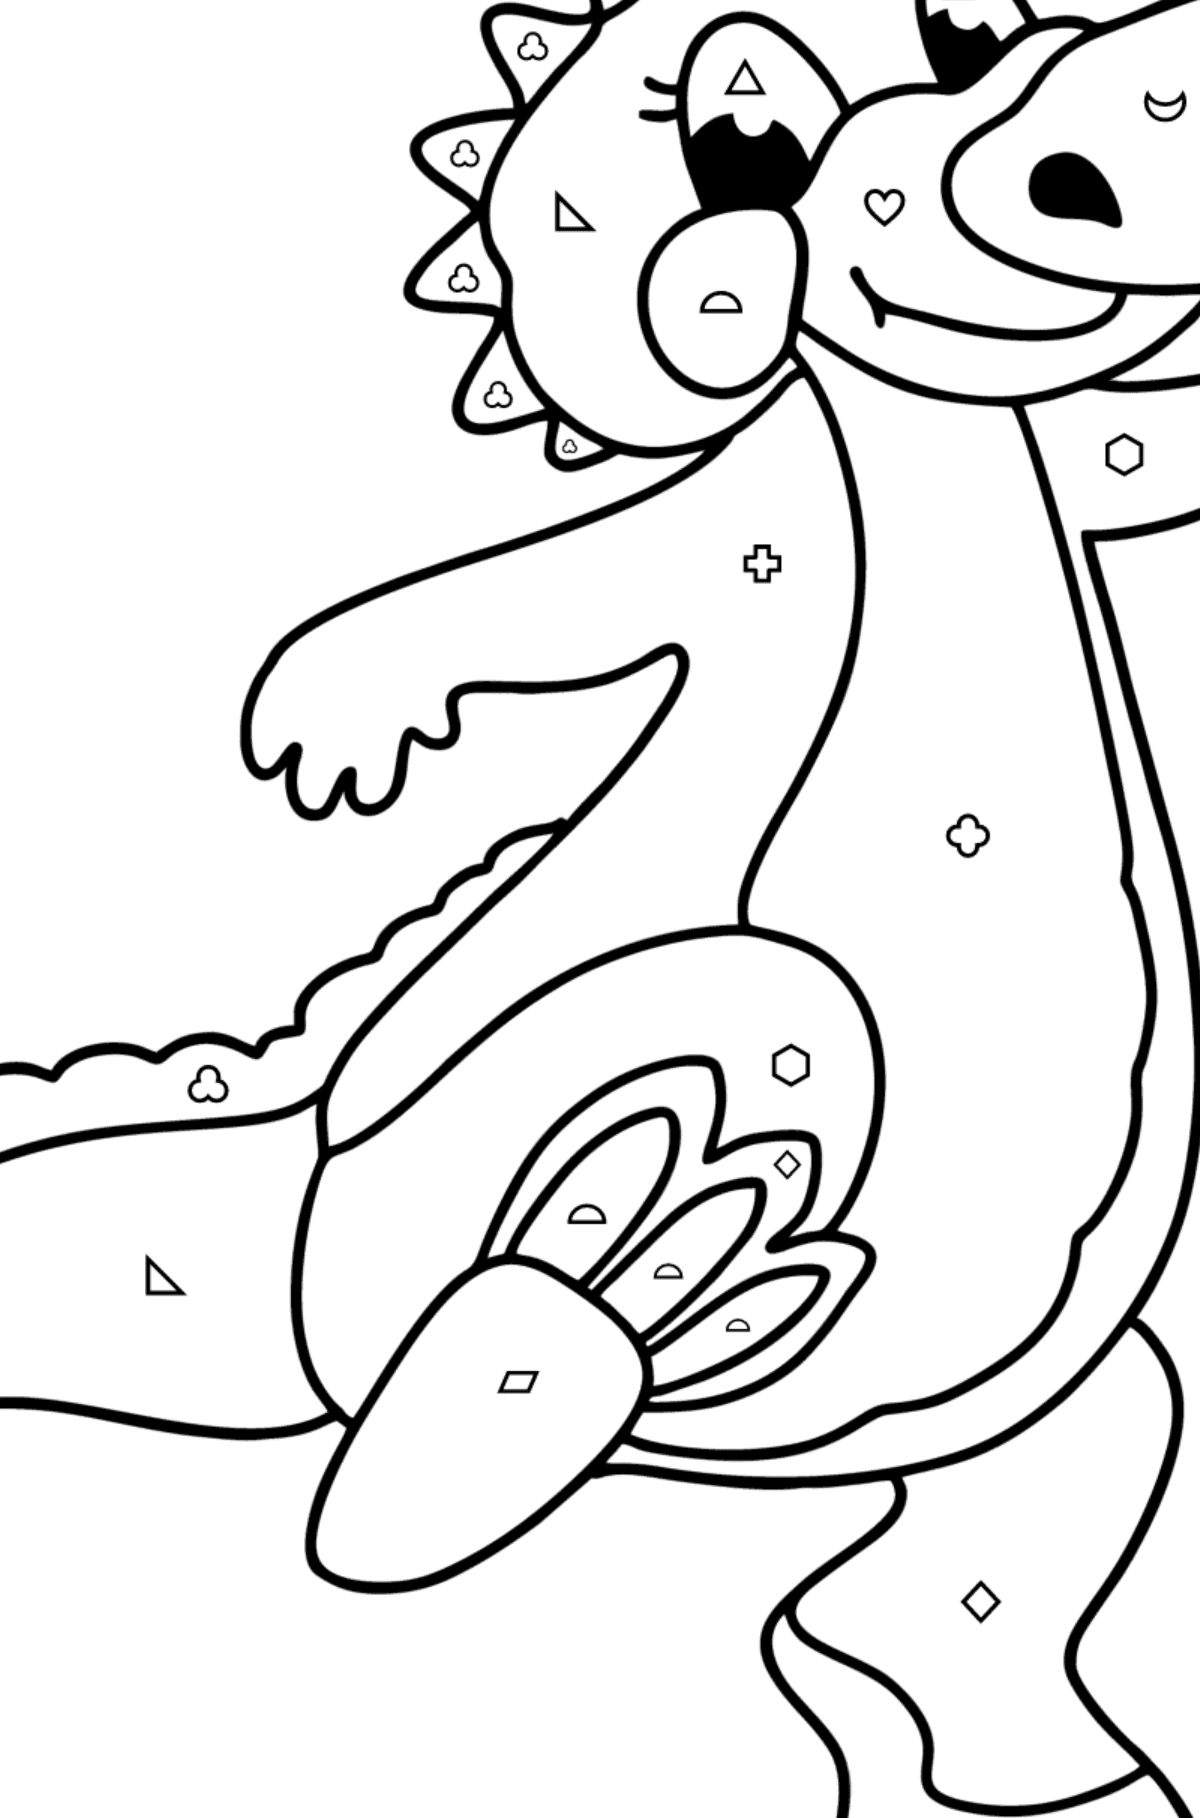 Happy dragon baby coloring page - Coloring by Geometric Shapes for Kids